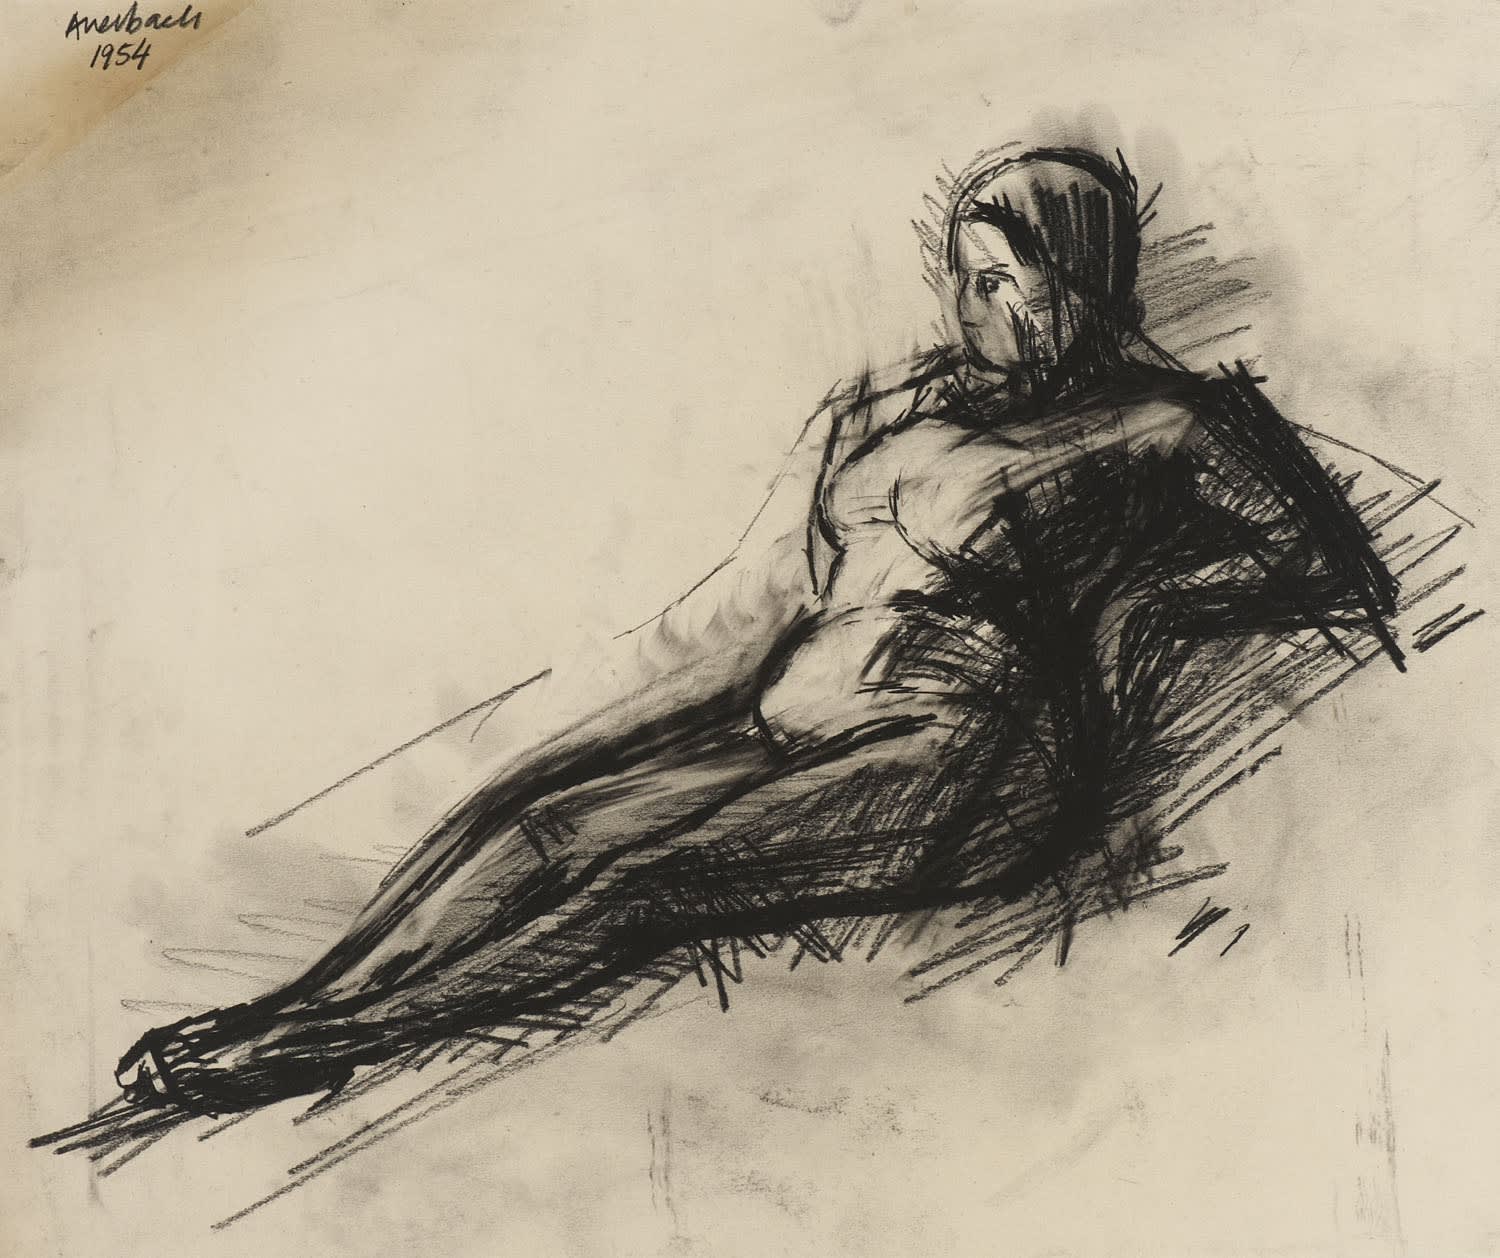 Frank Auerbach (1931-) Nude 1954 Charcoal on paper 45.5 x 54.5 cm Ben Uri Collection © Frank Auerbach, courtesy Marlborough Fine Art To see and discover more about this artist click here